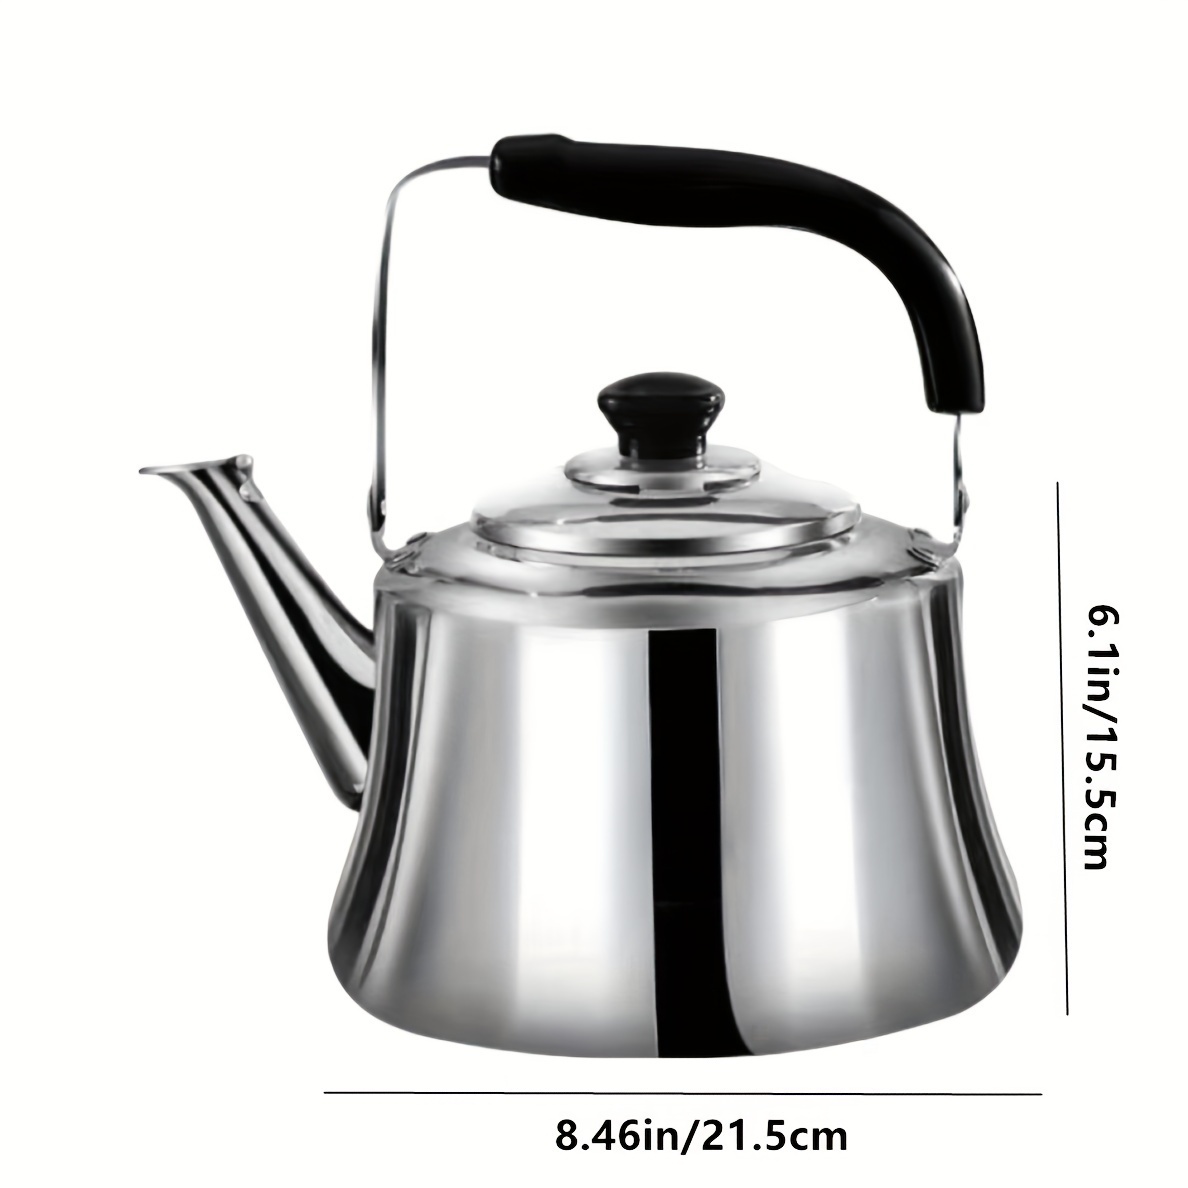 Stove Top Whistling Tea Kettle - Only Culinary Grade Stainless